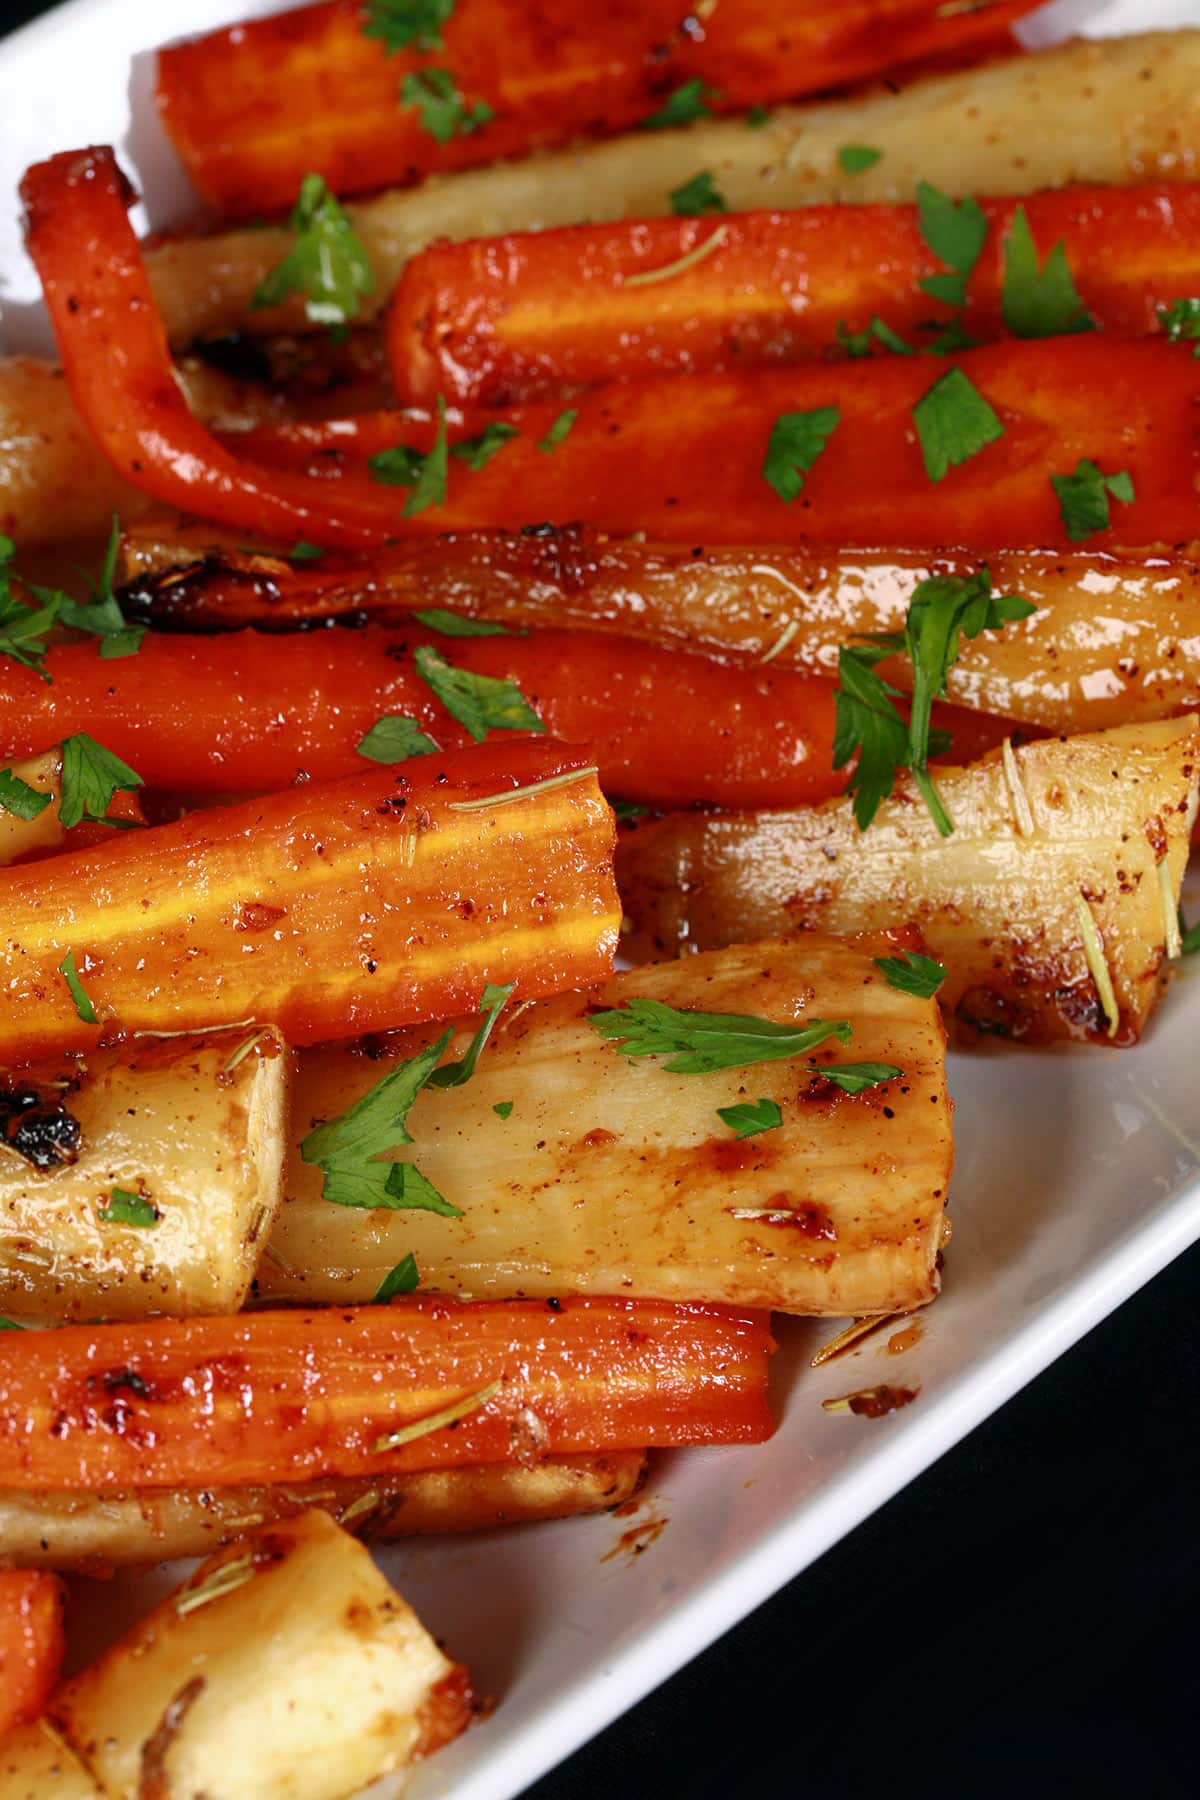 A platter of honey roasted parsnips and carrots, sprinkled with parsley.